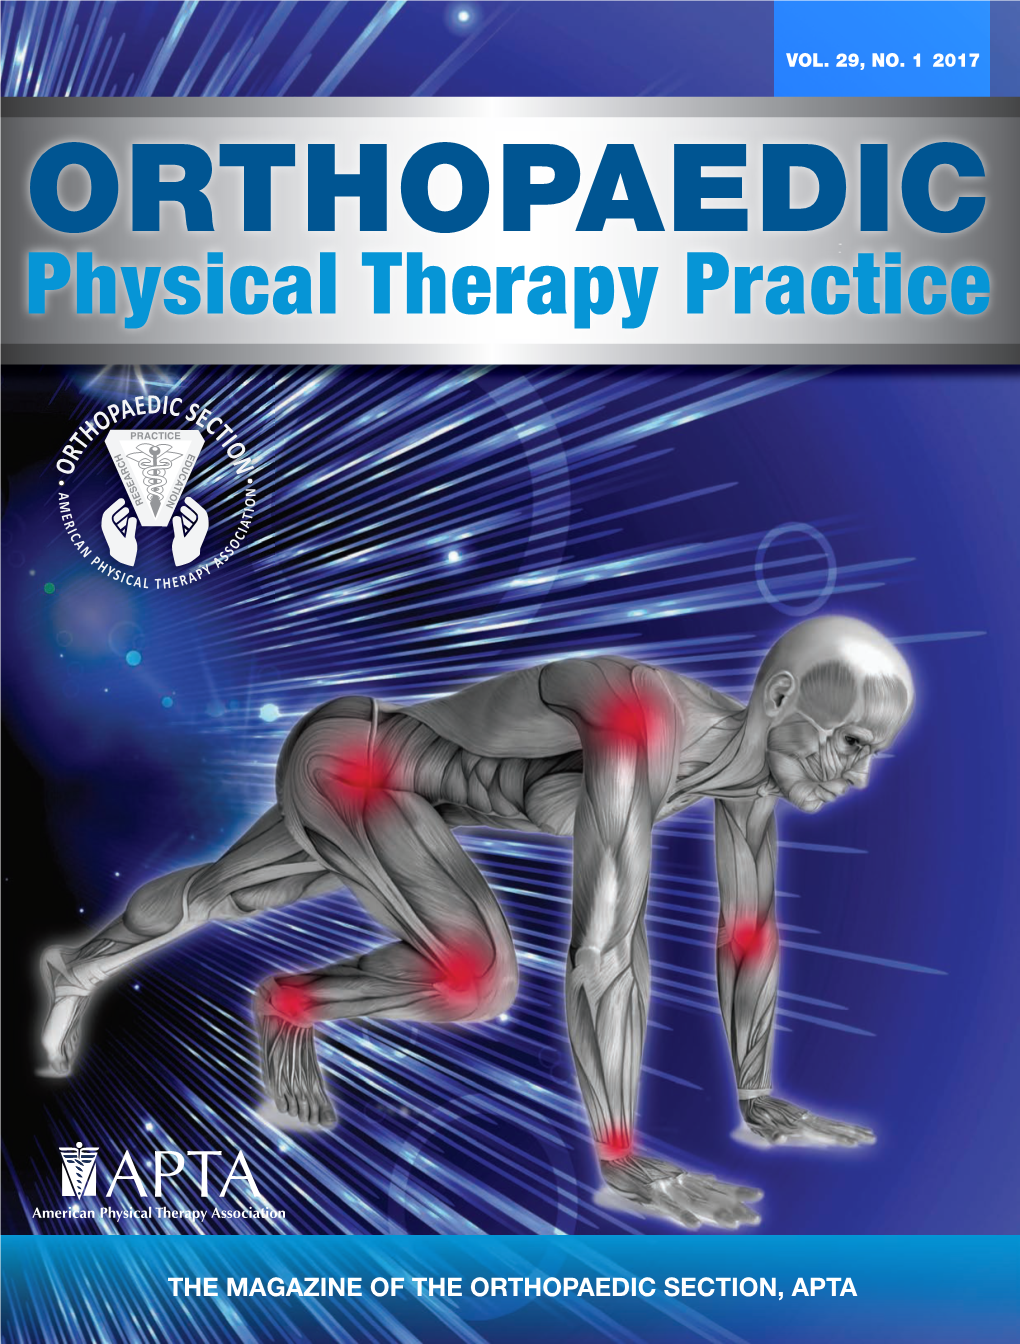 ORTHOPAEDIC Physical Therapy Practice